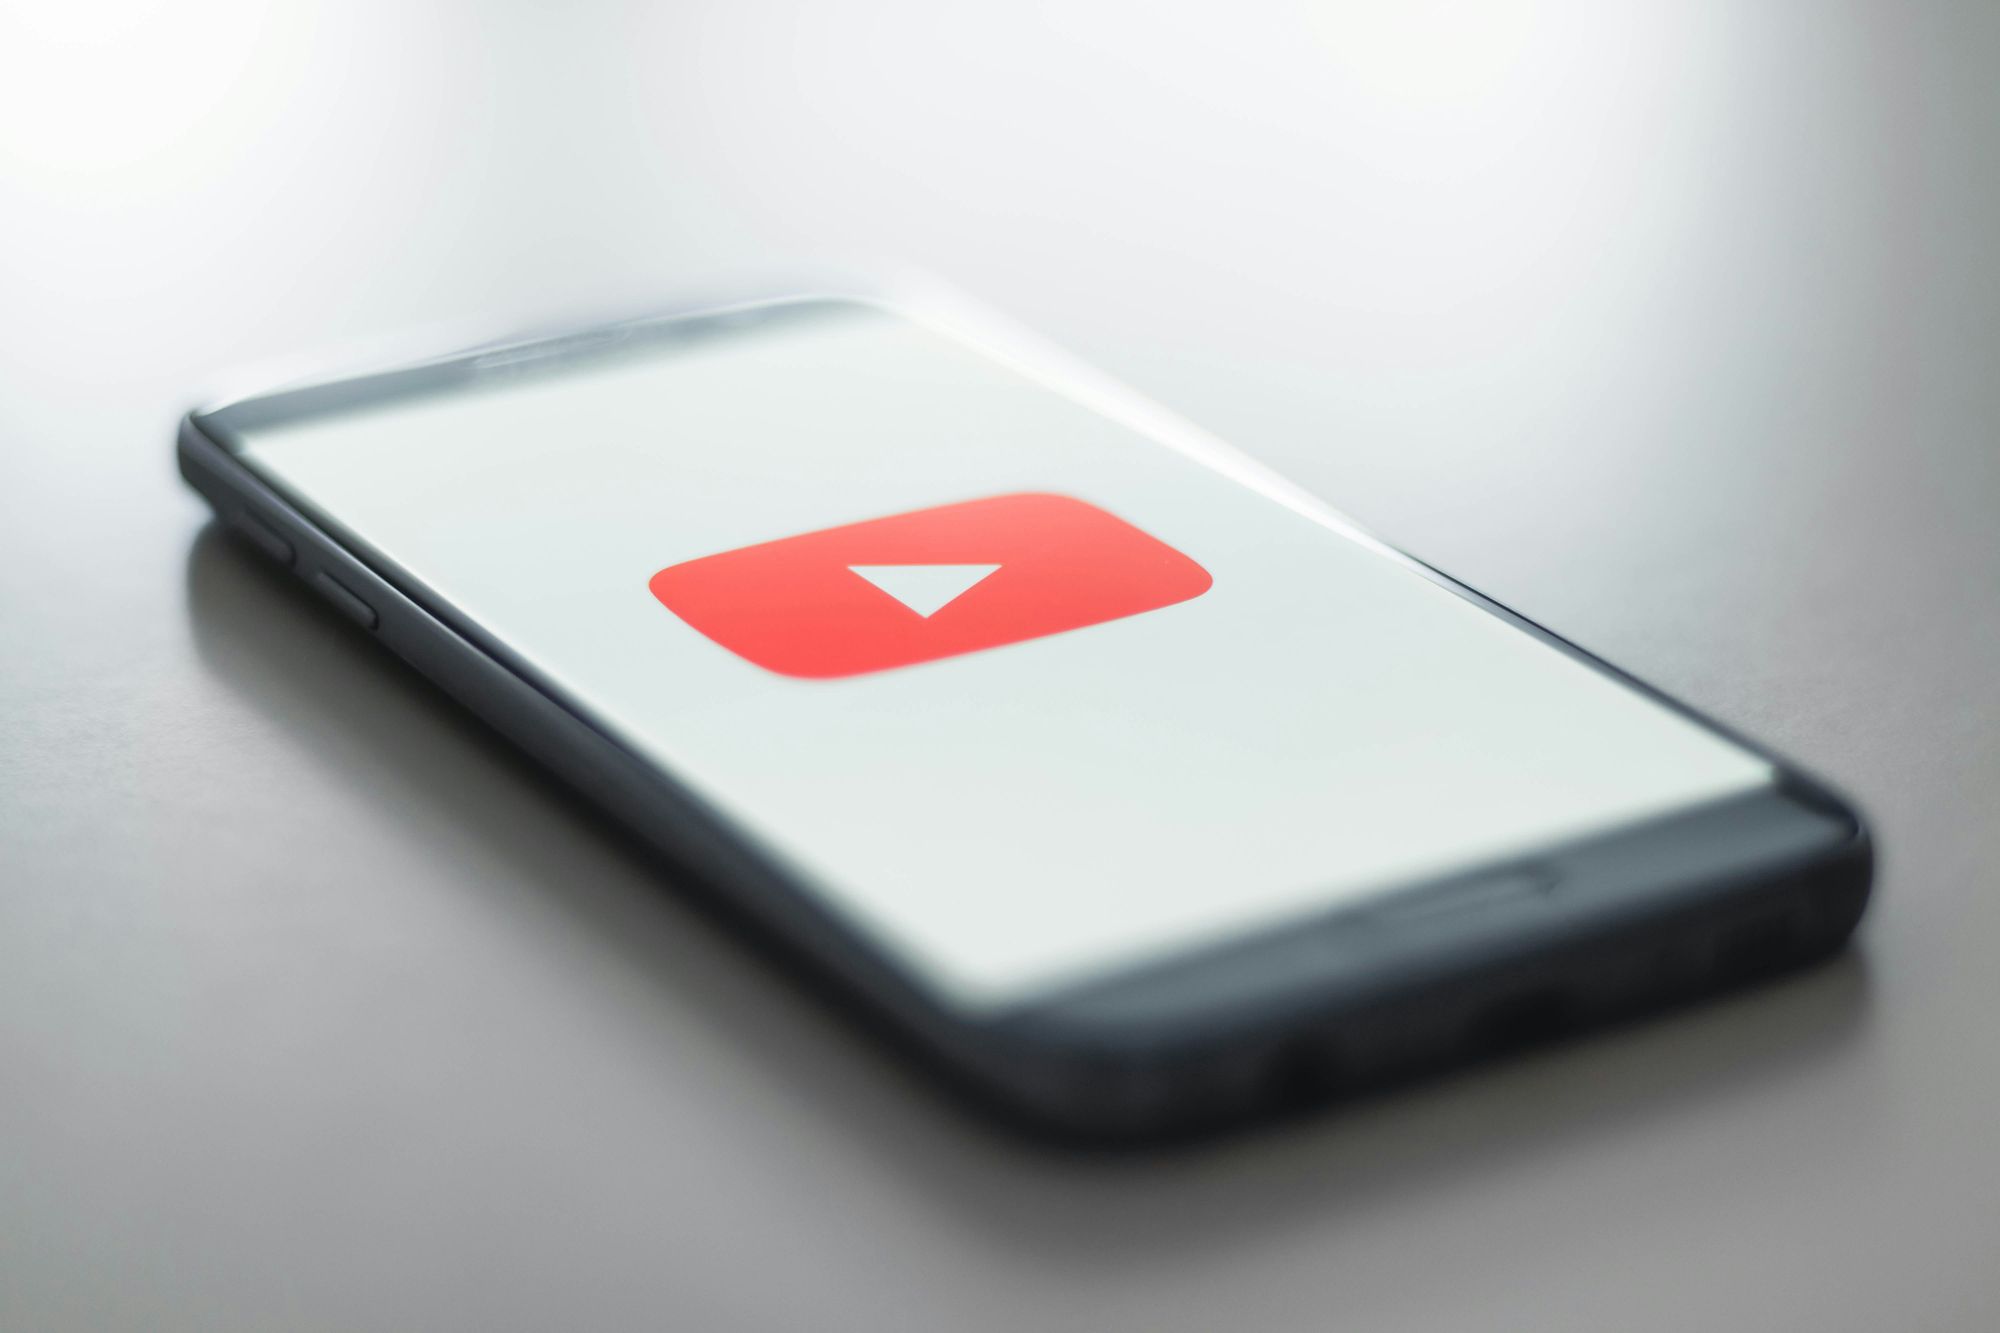 Here’s How to Create A Successful YouTube Channel